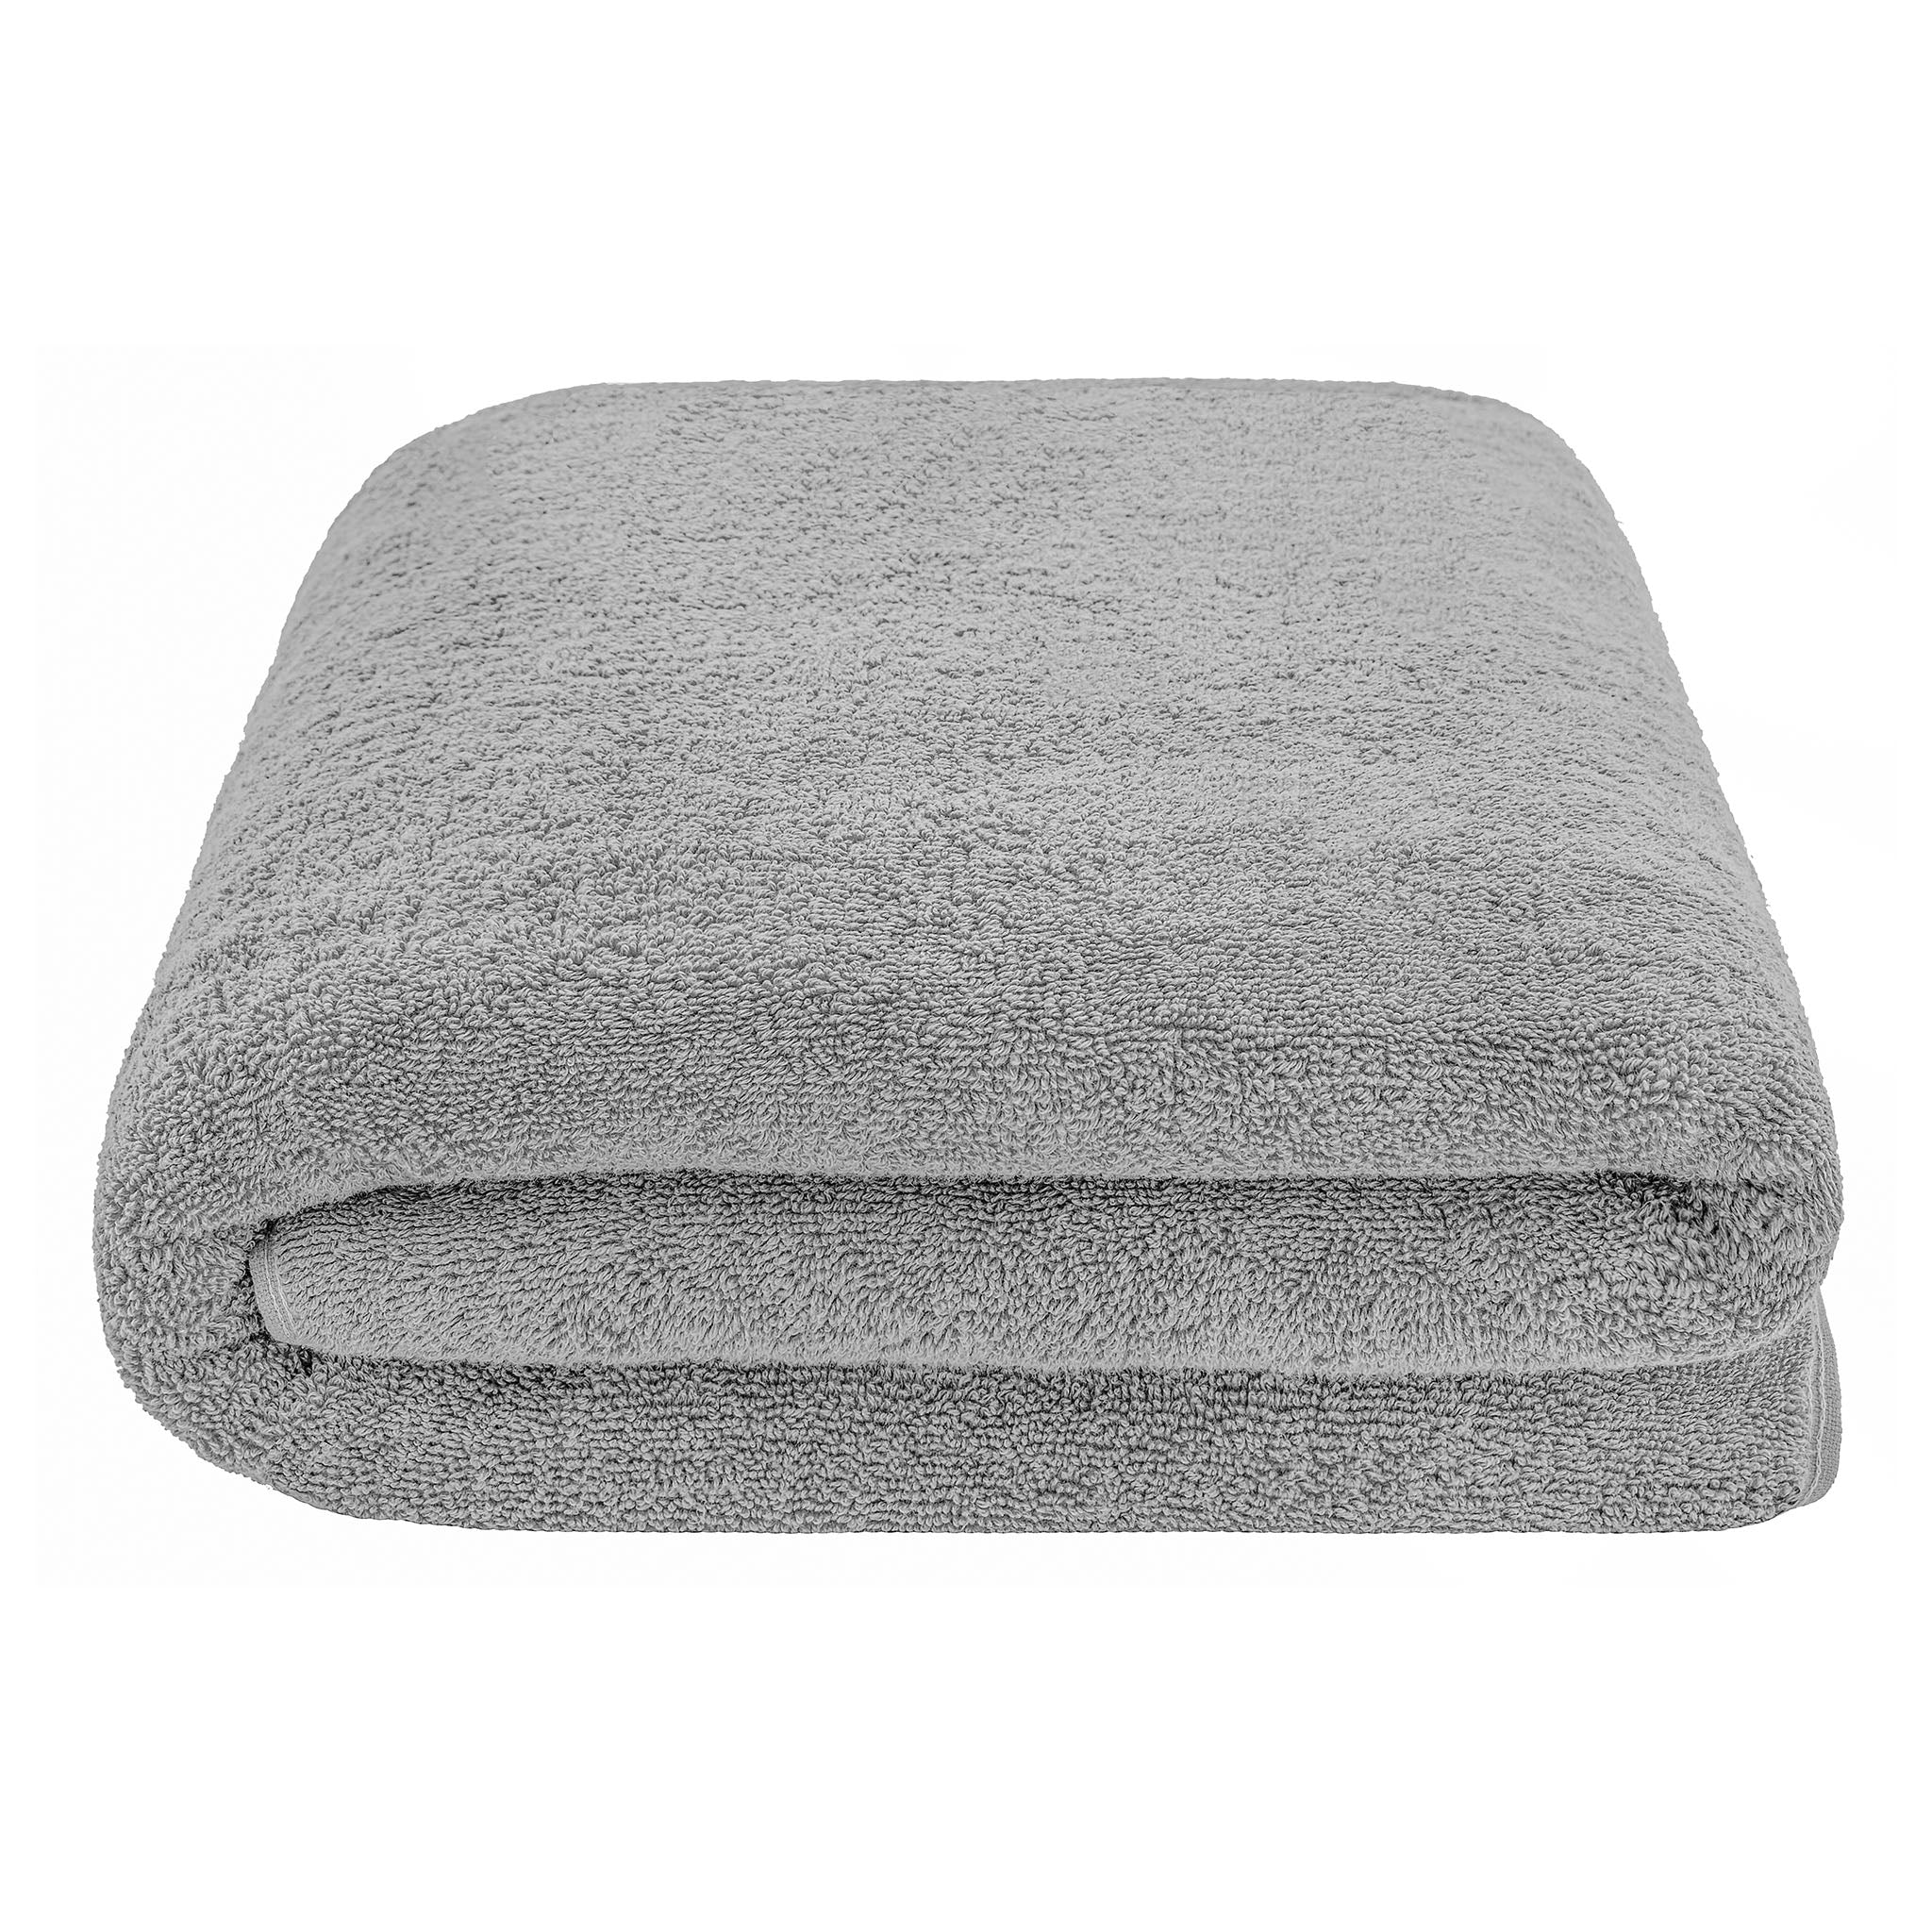 American Soft Linen Bath Sheet 40x80 inch 100% Cotton Extra Large Oversized Bath Towel Sheet - Sand Taupe, Size: Oversized Bath Sheet 40x80, Beige